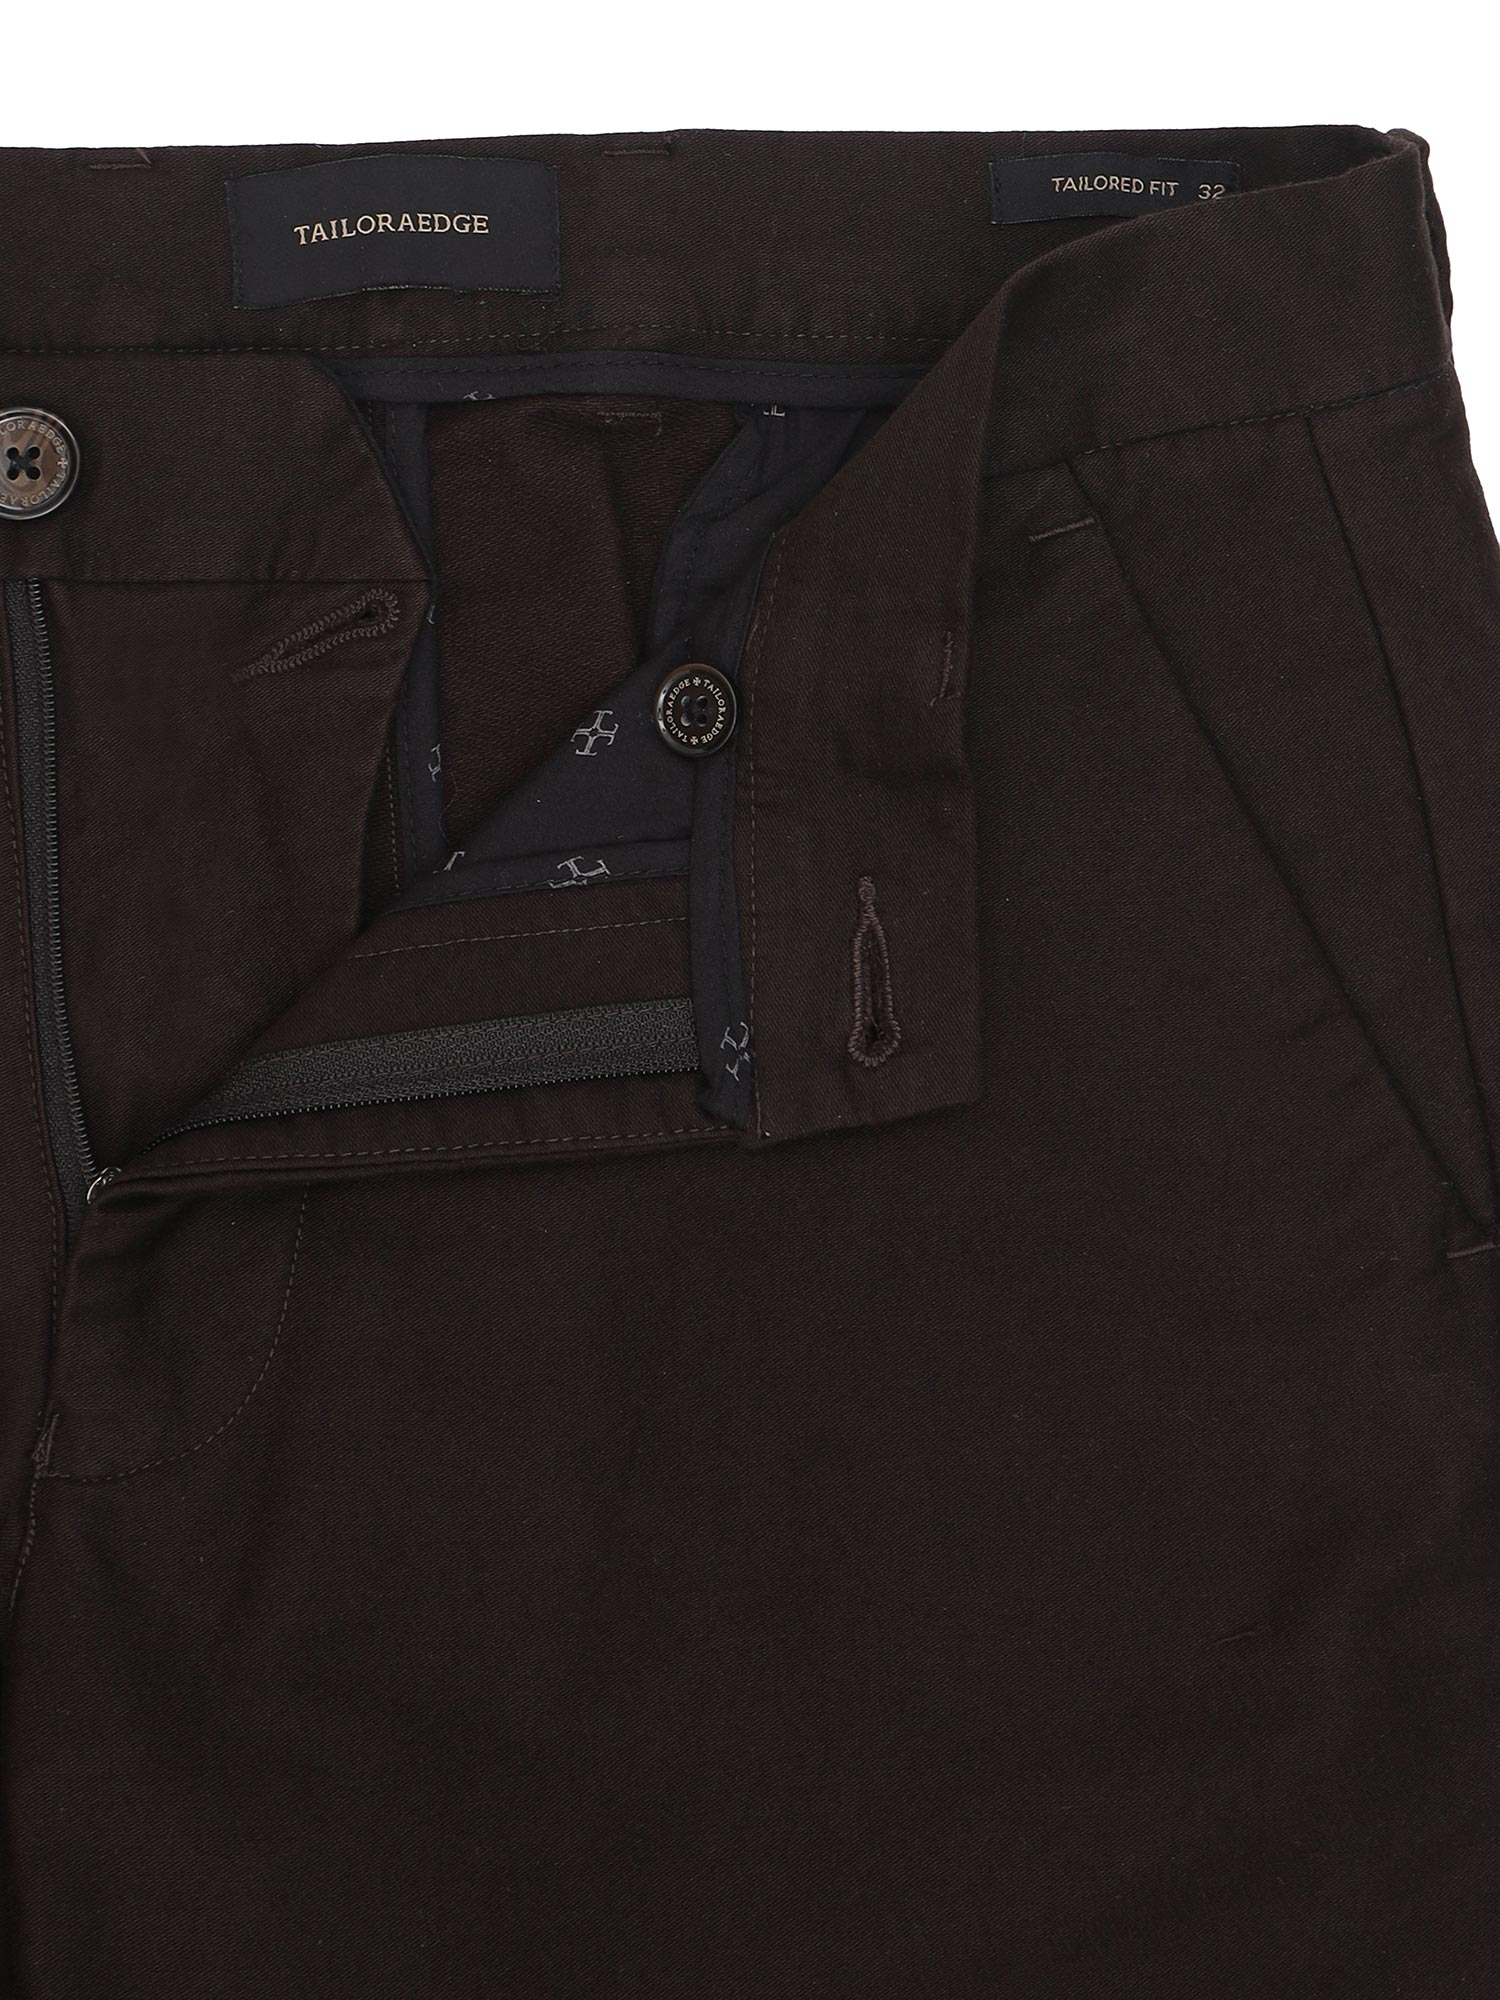 Soft Modal Dark Brown Relaxed Pant